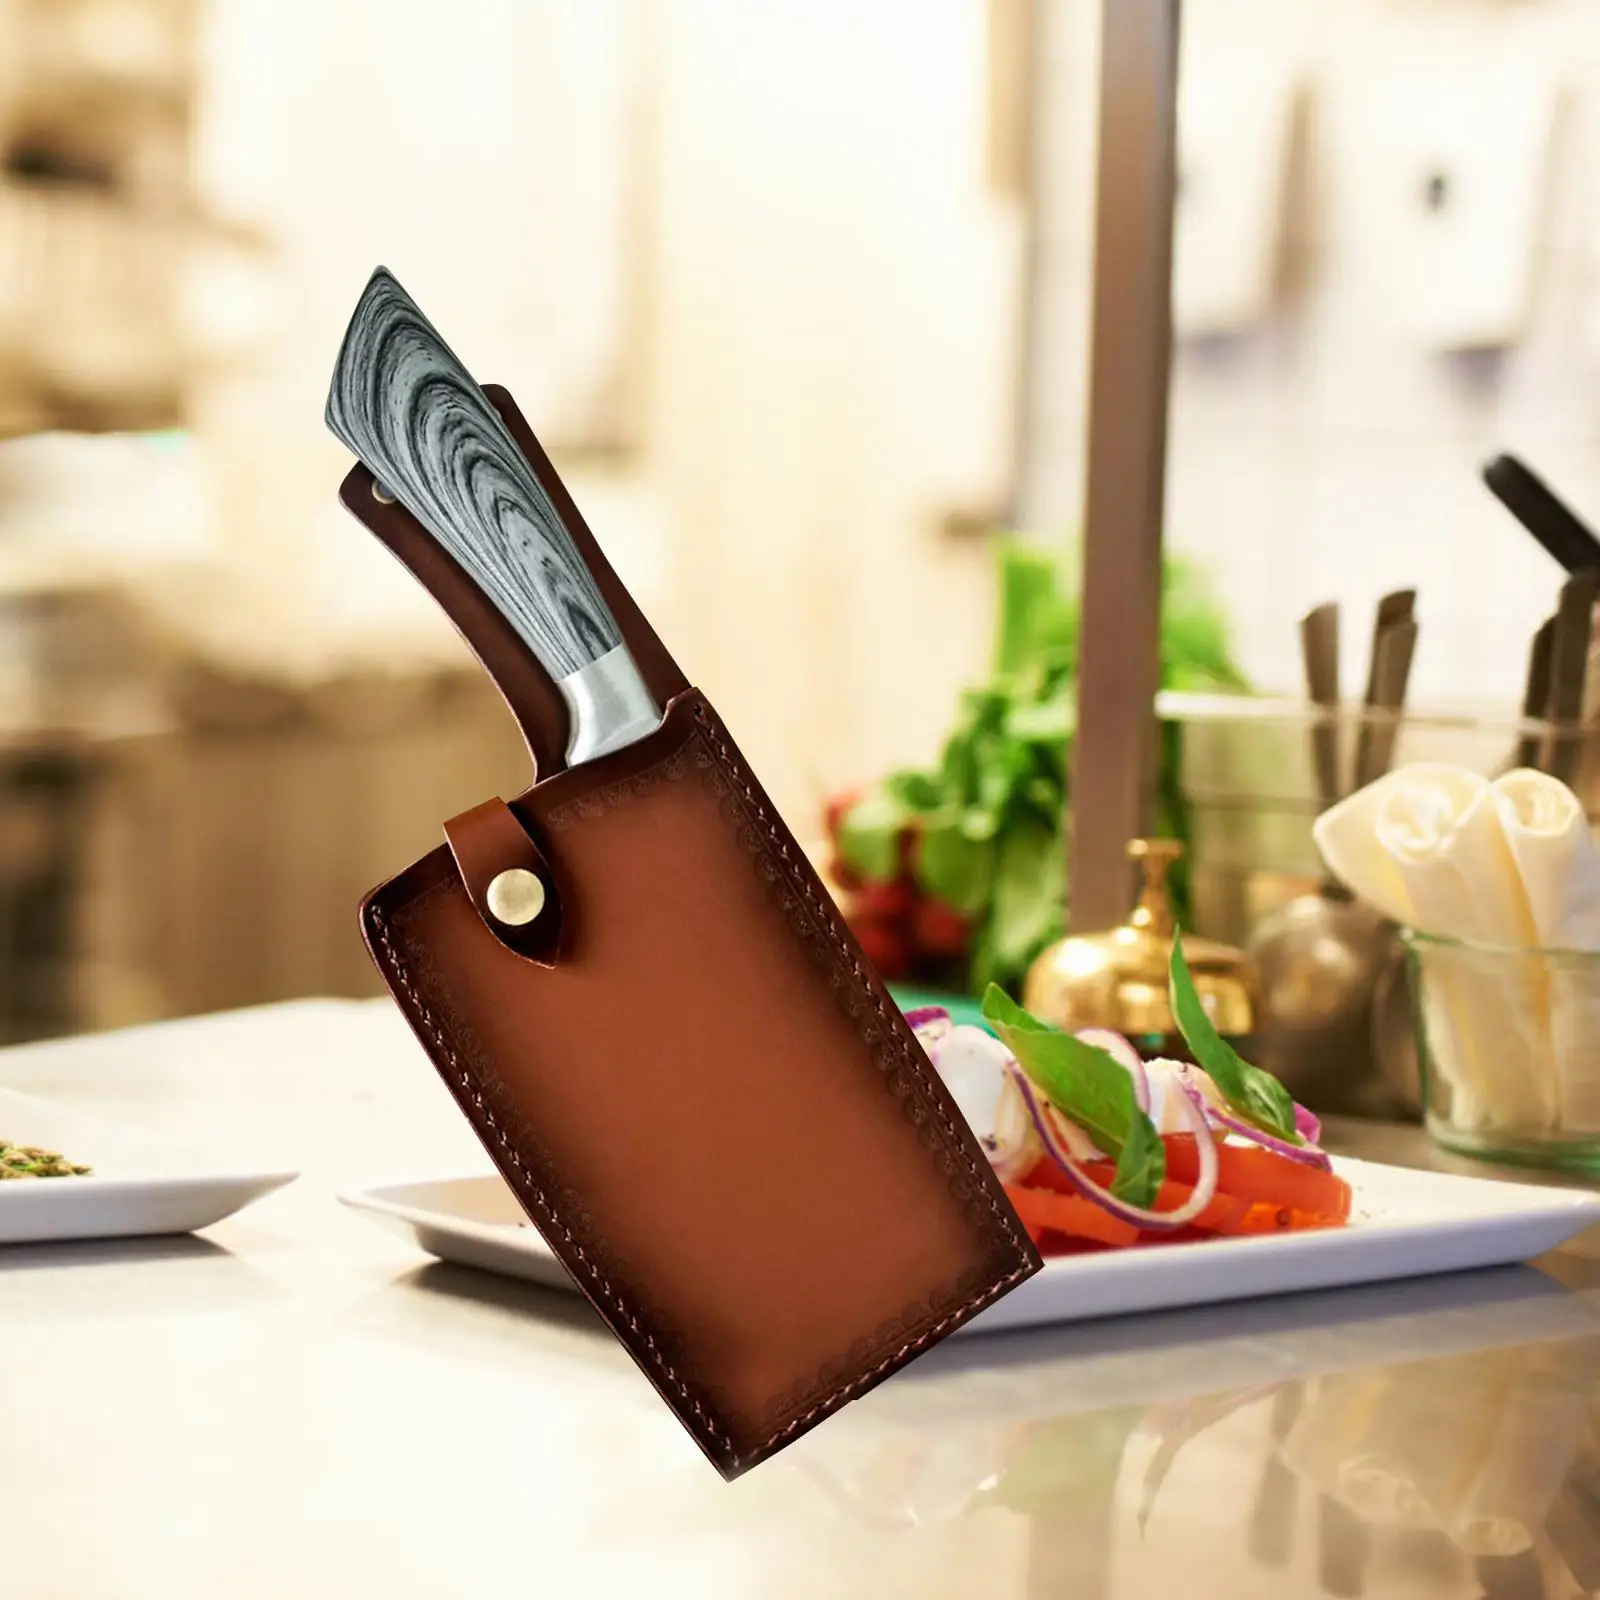 Knife Sheath Protector Cutter Tool Durable Chef Knife Protection Portable Kitchen Knife Cover Knife Sleeve Cleaver Sheath